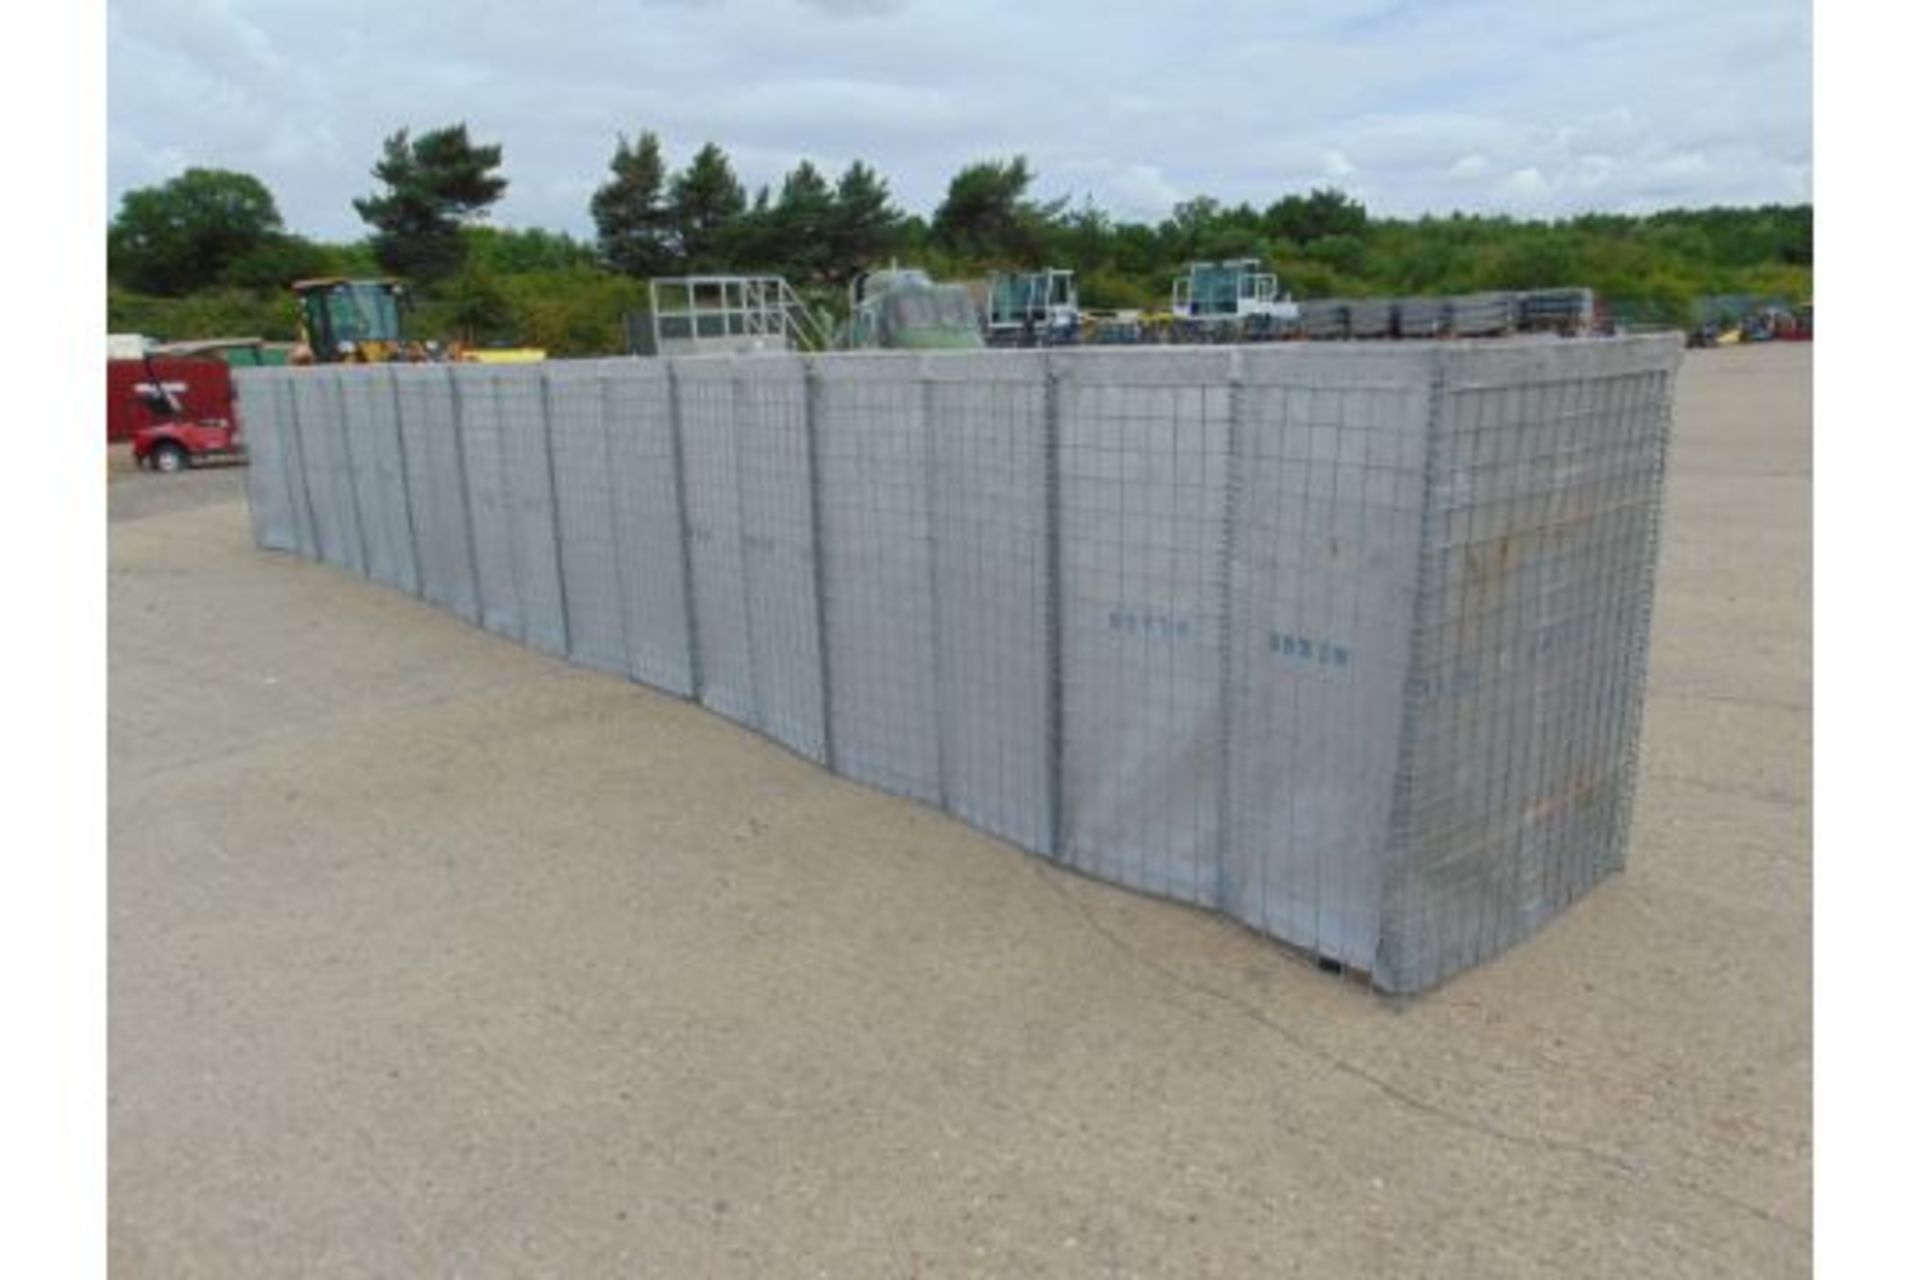 From UK MOD New Unissued HESCO Concertainer MIL 1 Height 1.37m Width 1.06m Length 10m - Image 2 of 7